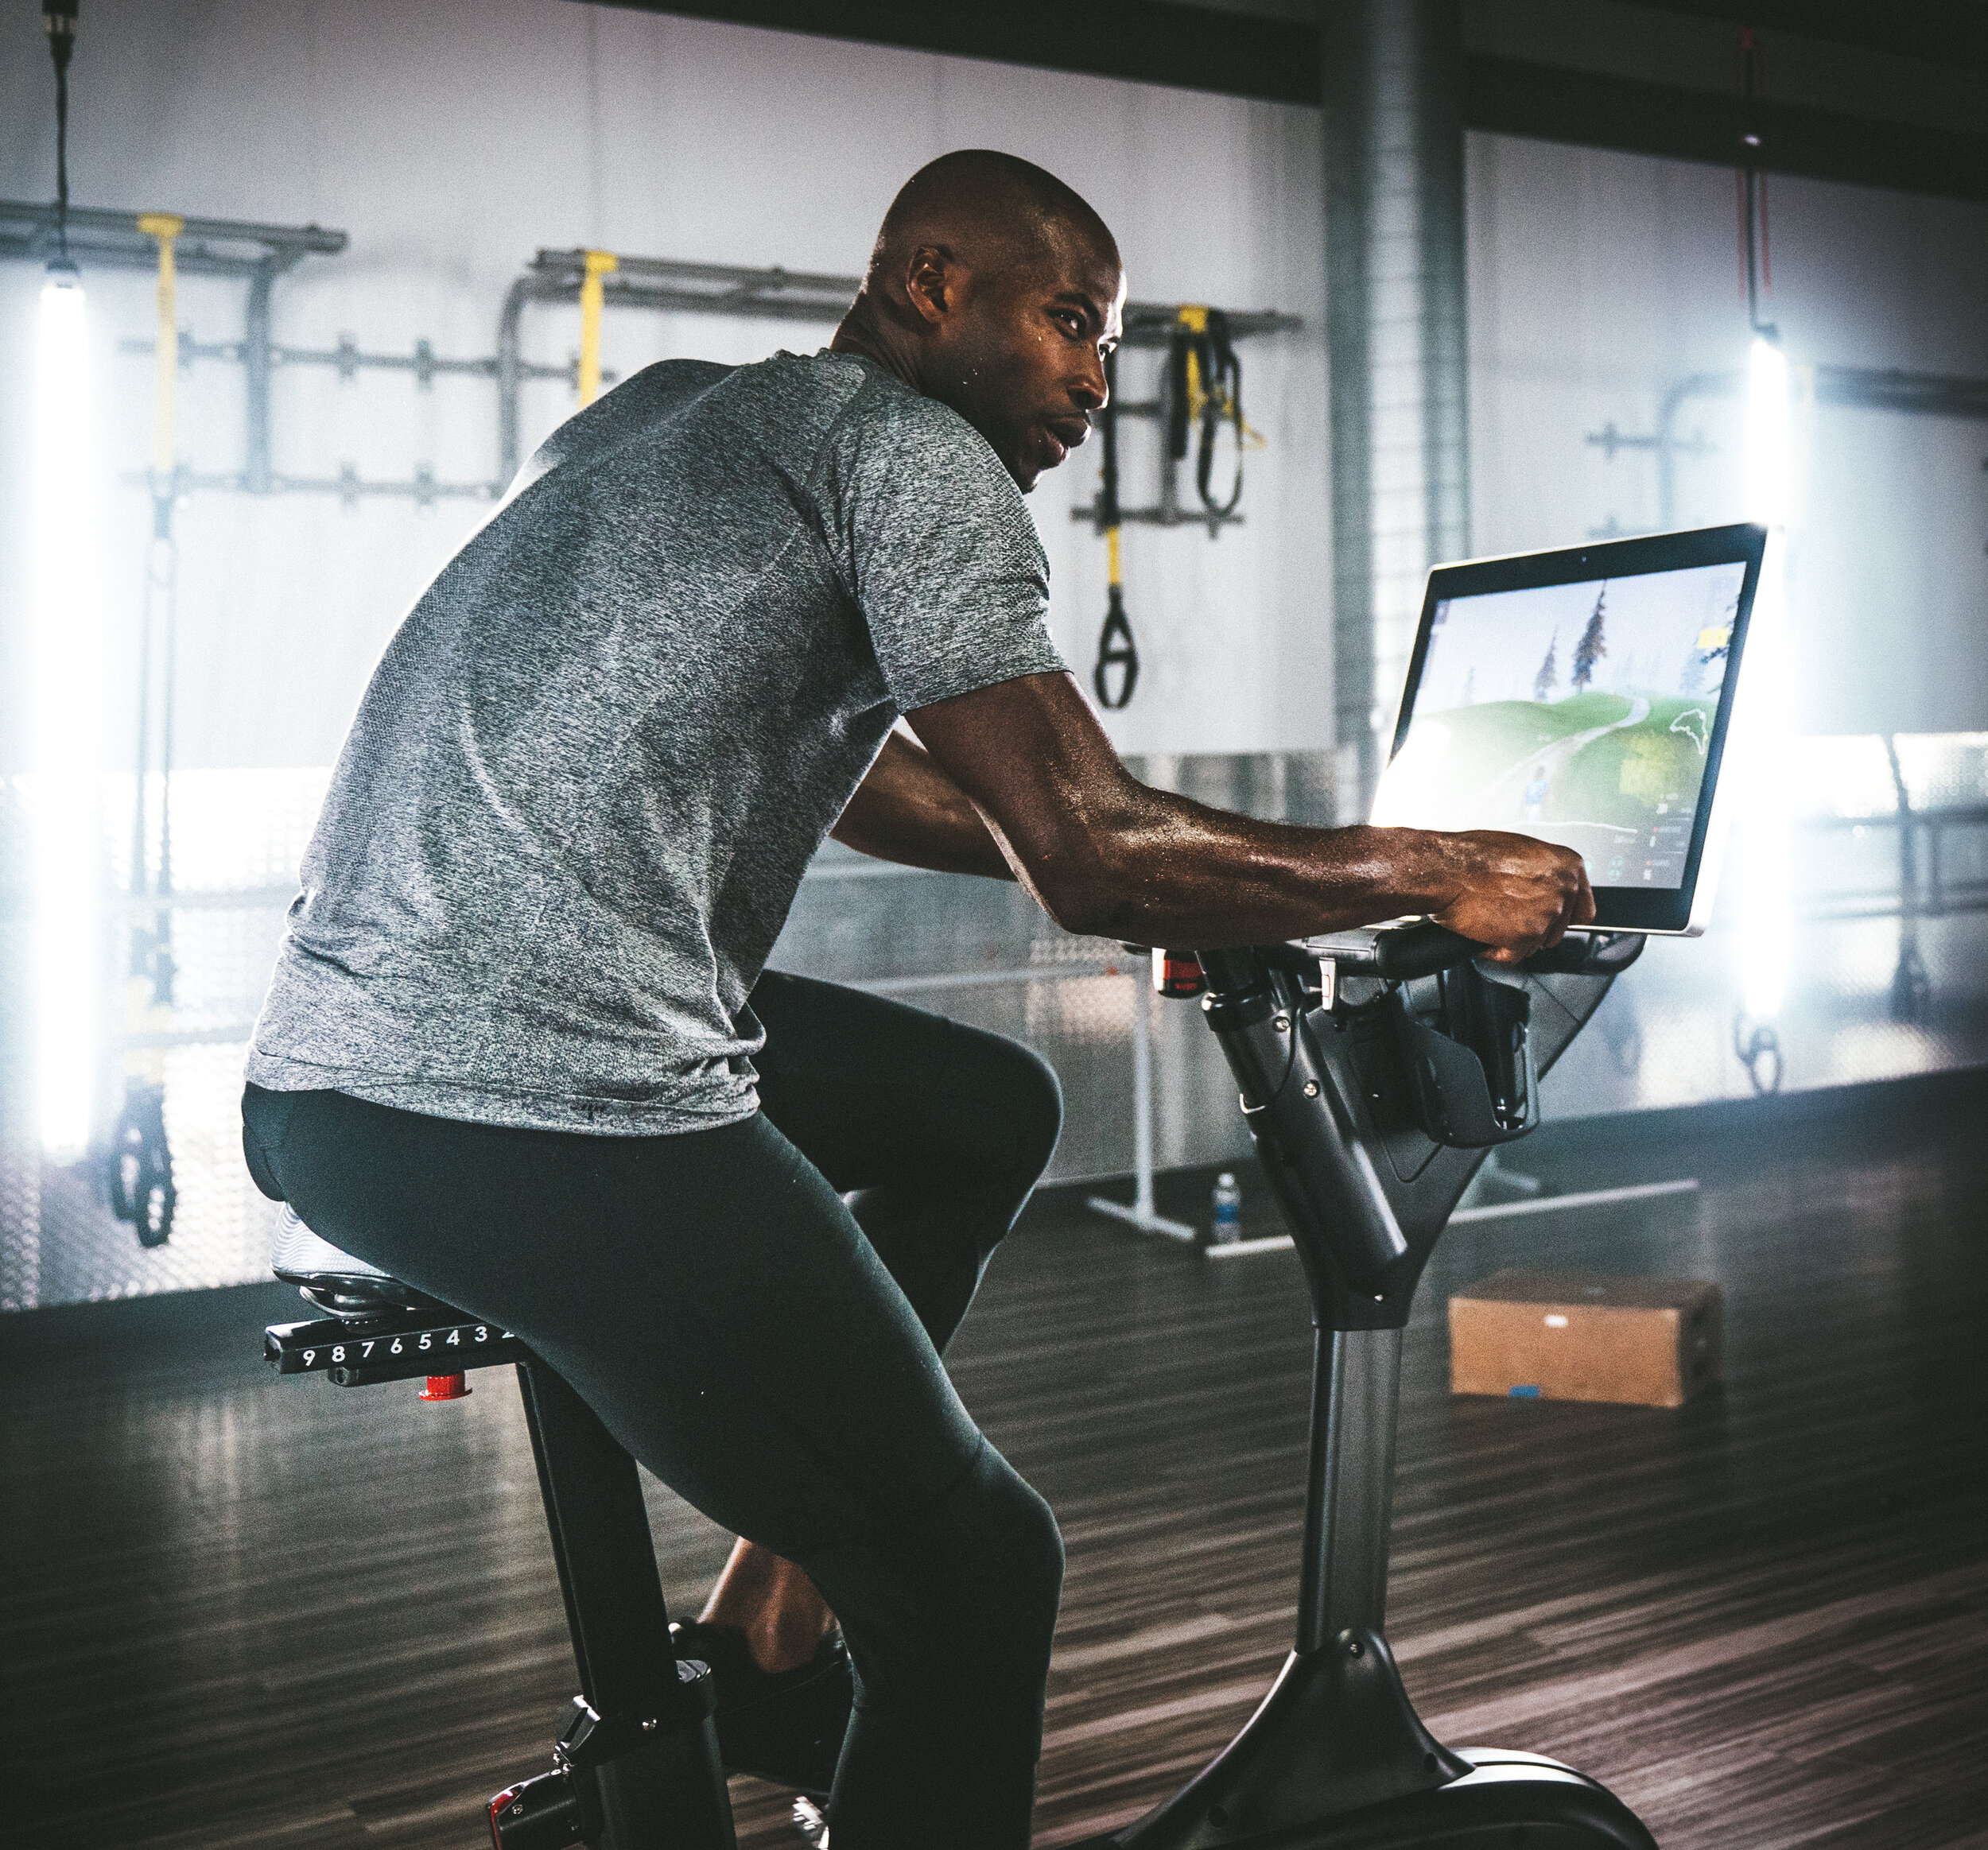 THE WORLD'S MOST ADVANCED EXERCISE BIKE